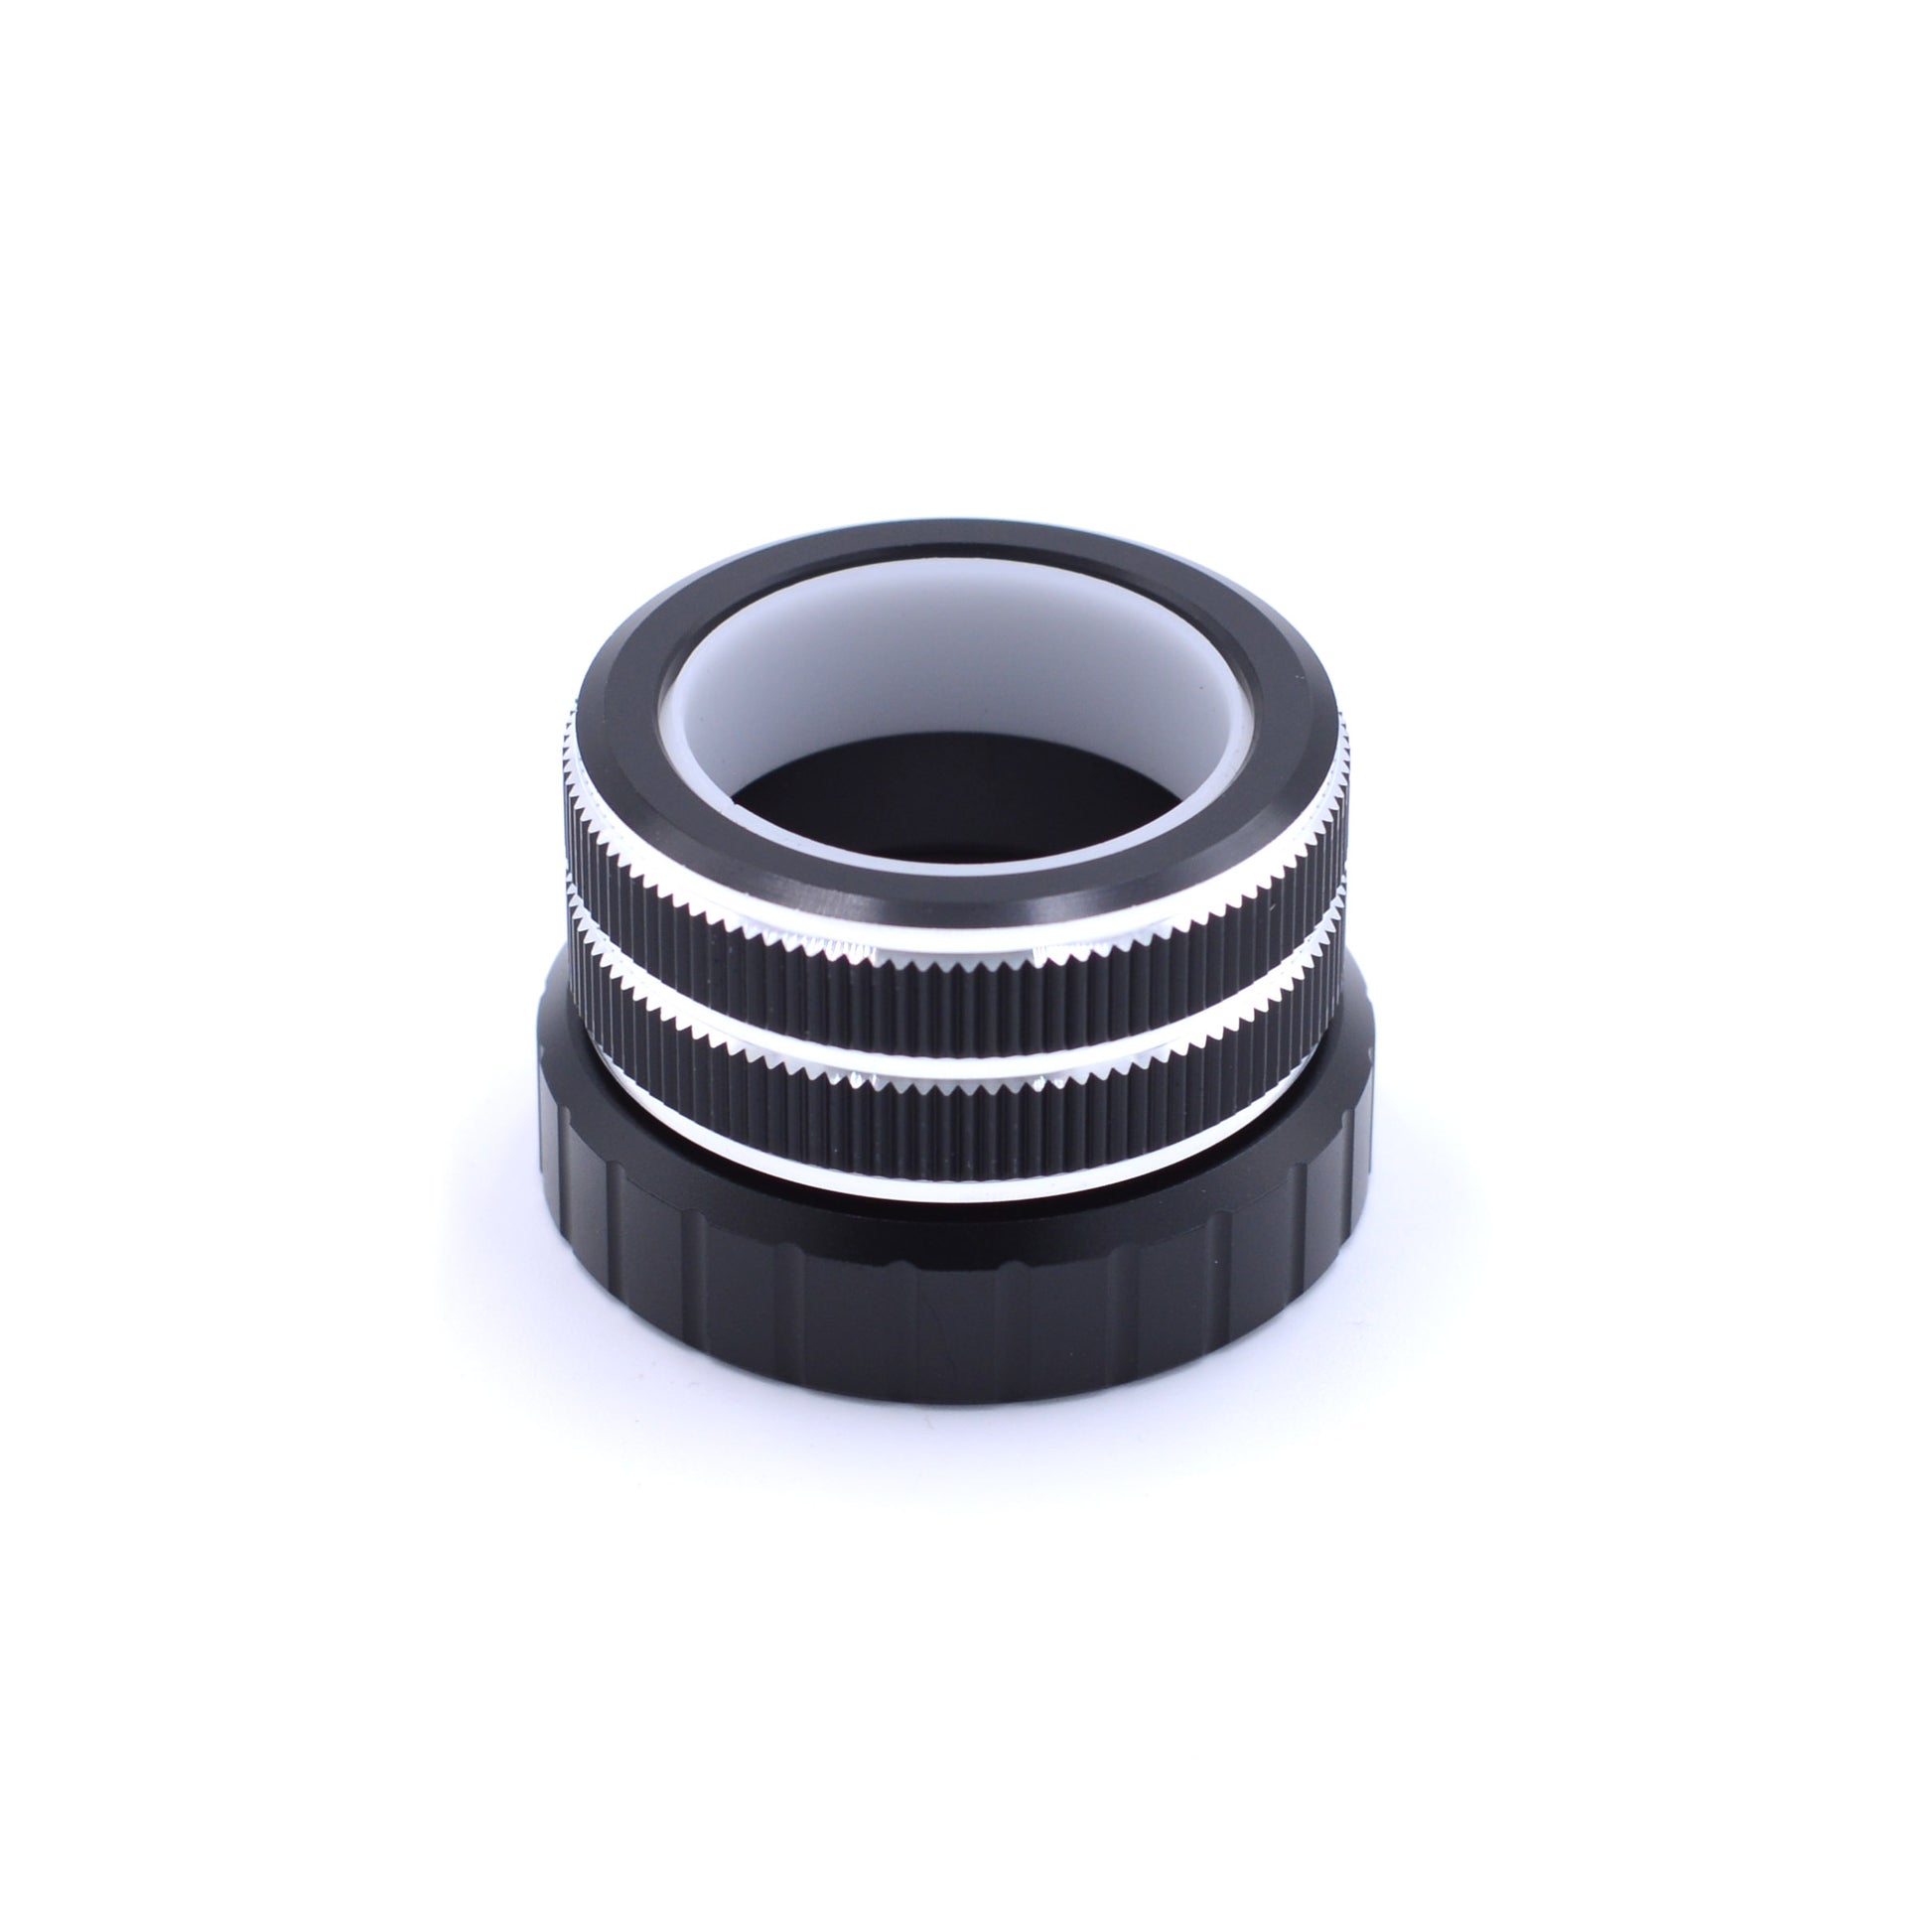 1.25" to M42 Rotolock Adapter for Planetary Imaging | Dark Clear Skies.